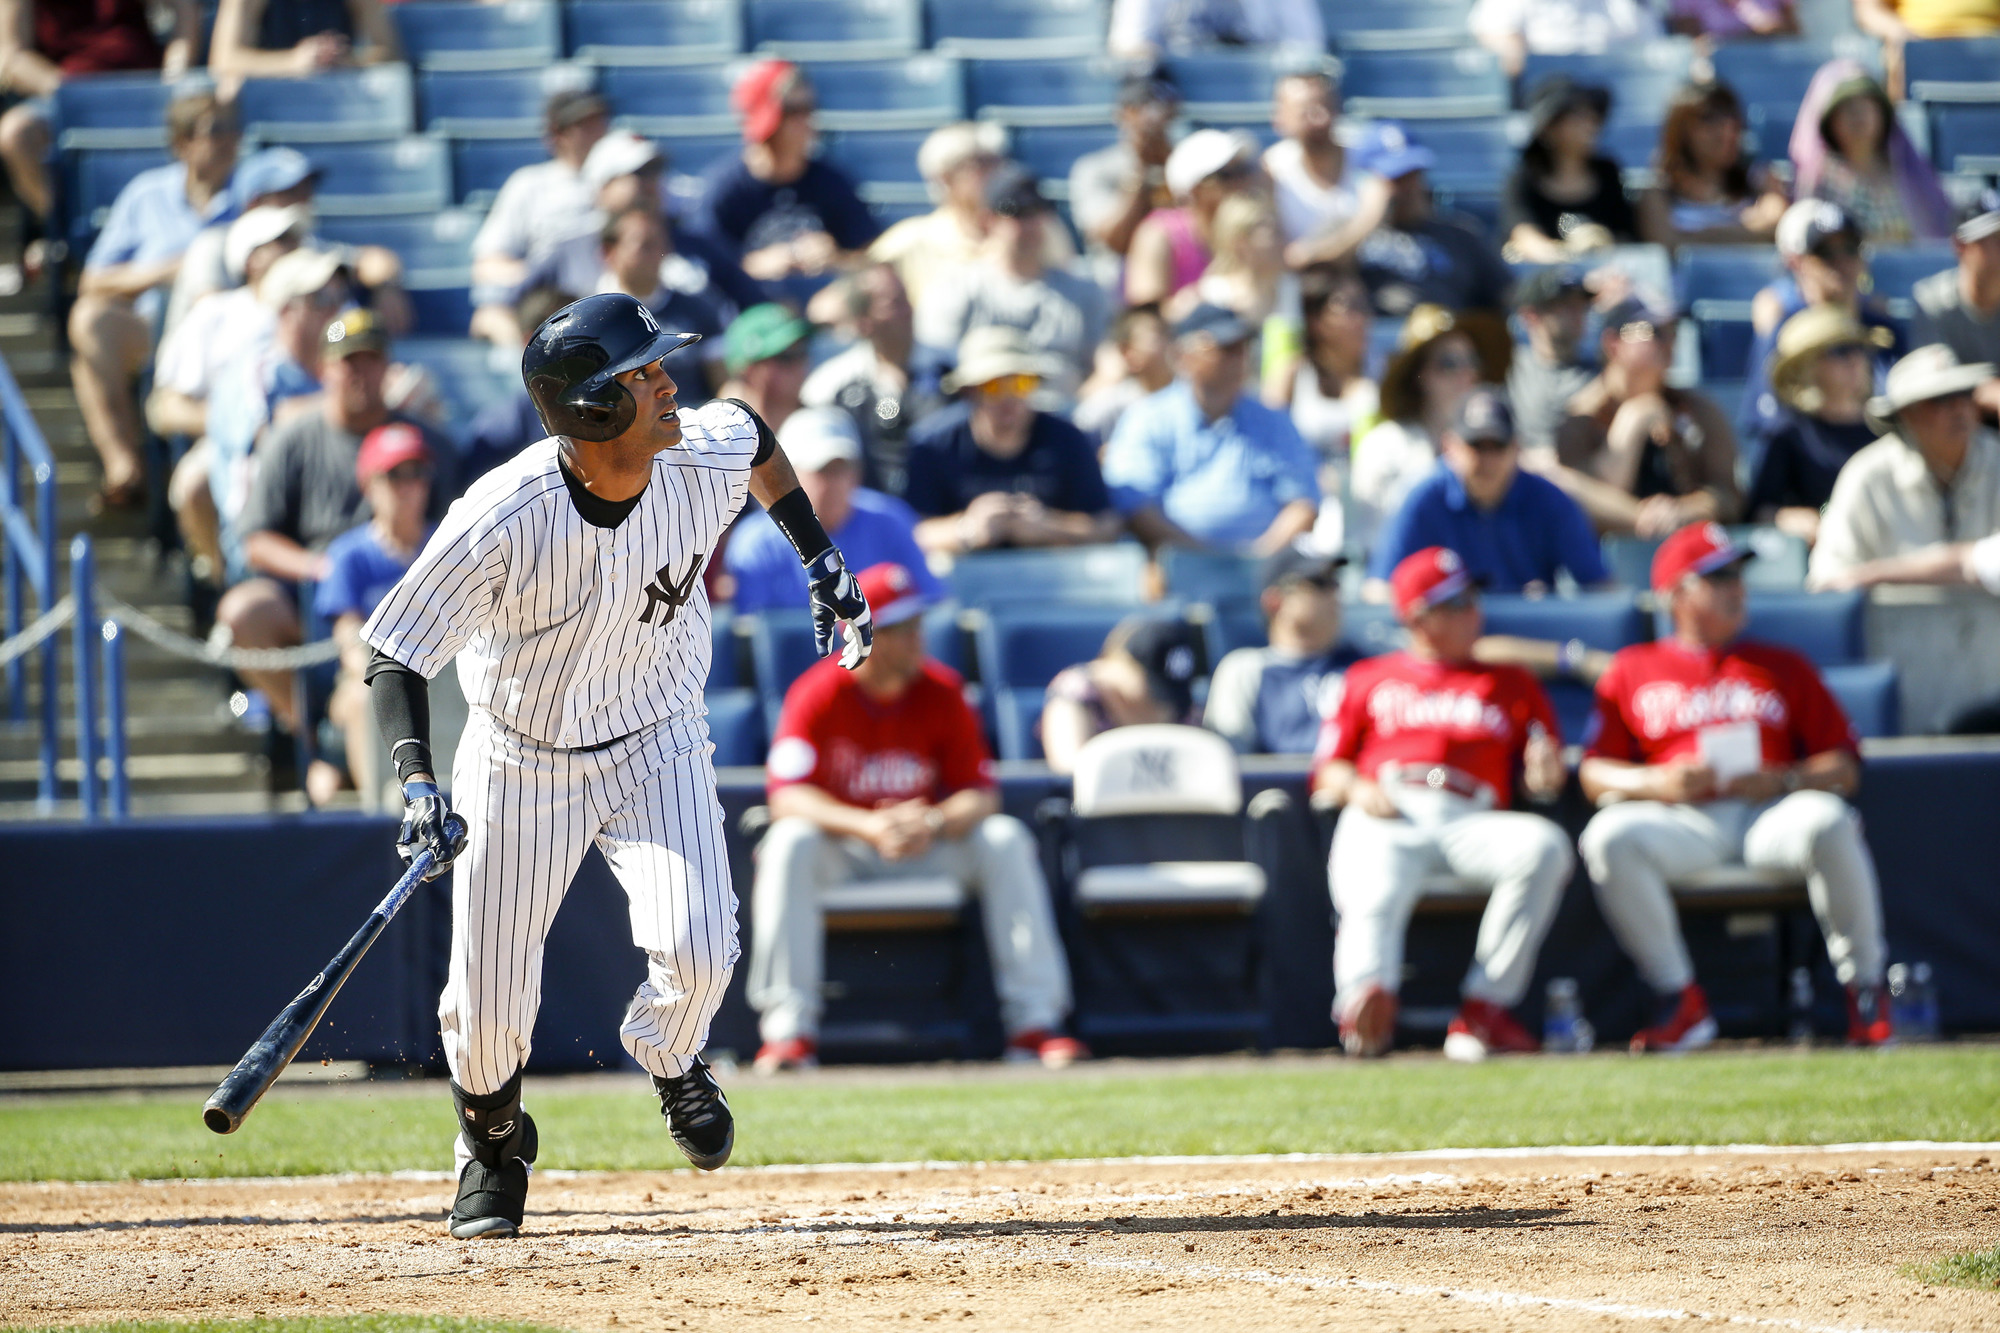 Mason Williams homered in just his second at-bat as a member of the New York Yankees.